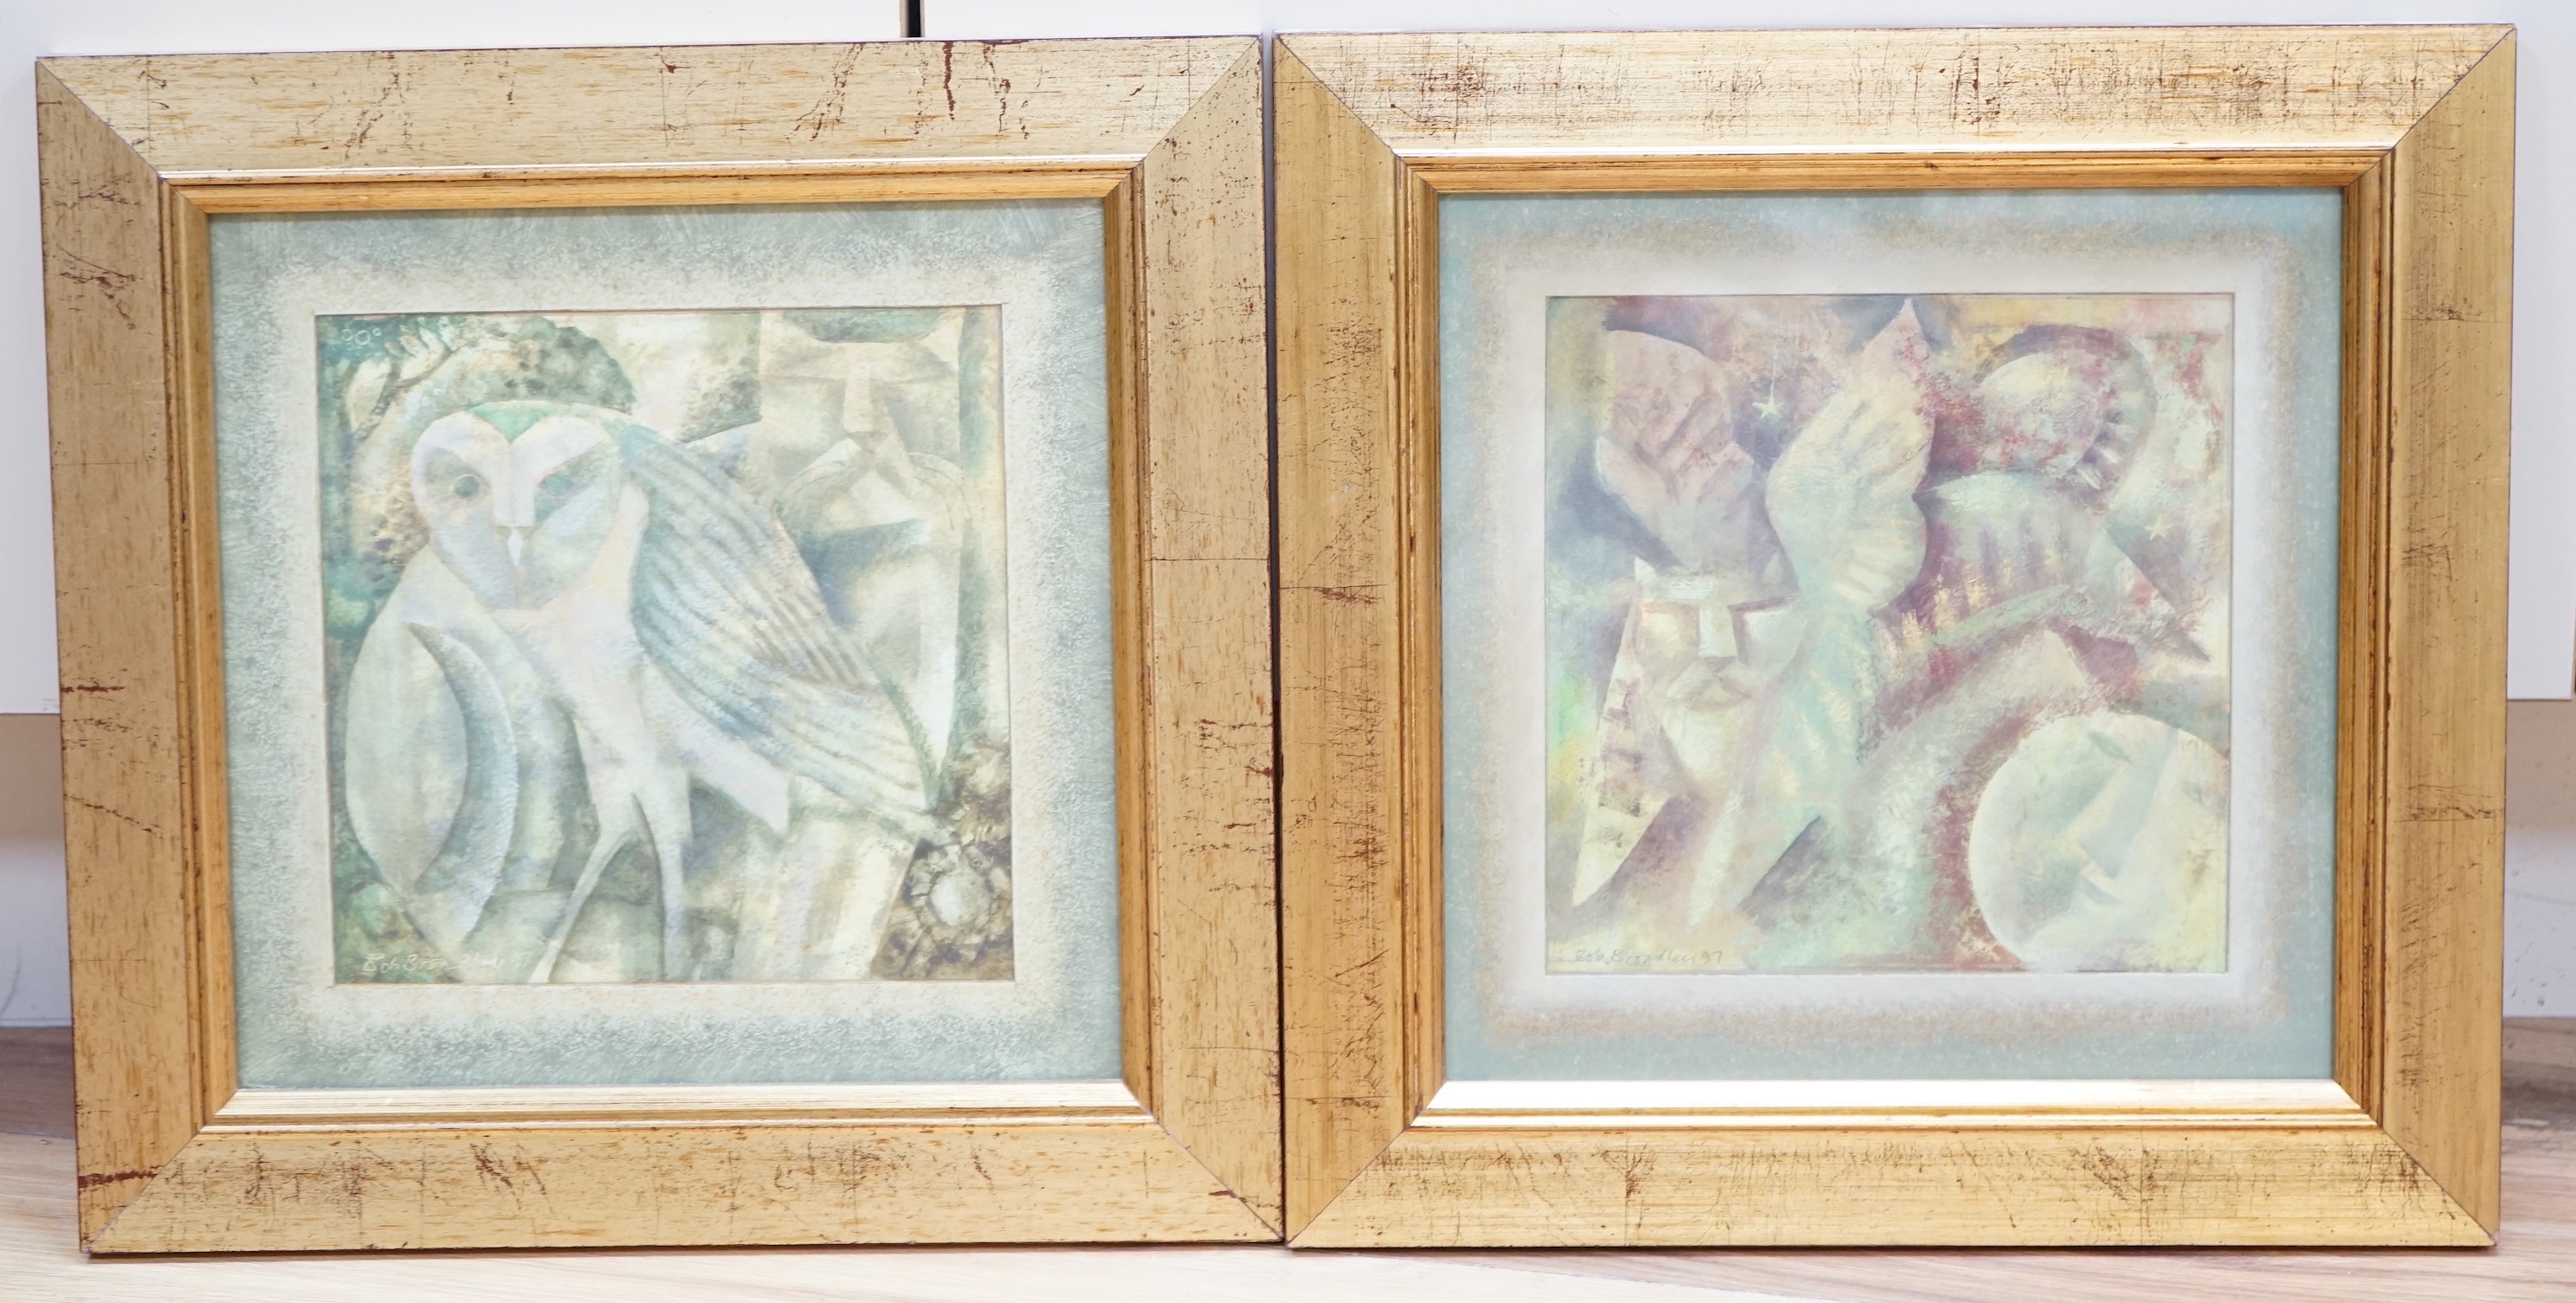 Bob Broadley (b.1939), pair of mixed medias, 'If cats could fly' and 'The owl and the pussy cat', each signed and dated '97, inscribed gallery labels verso, each 20 x 20cm